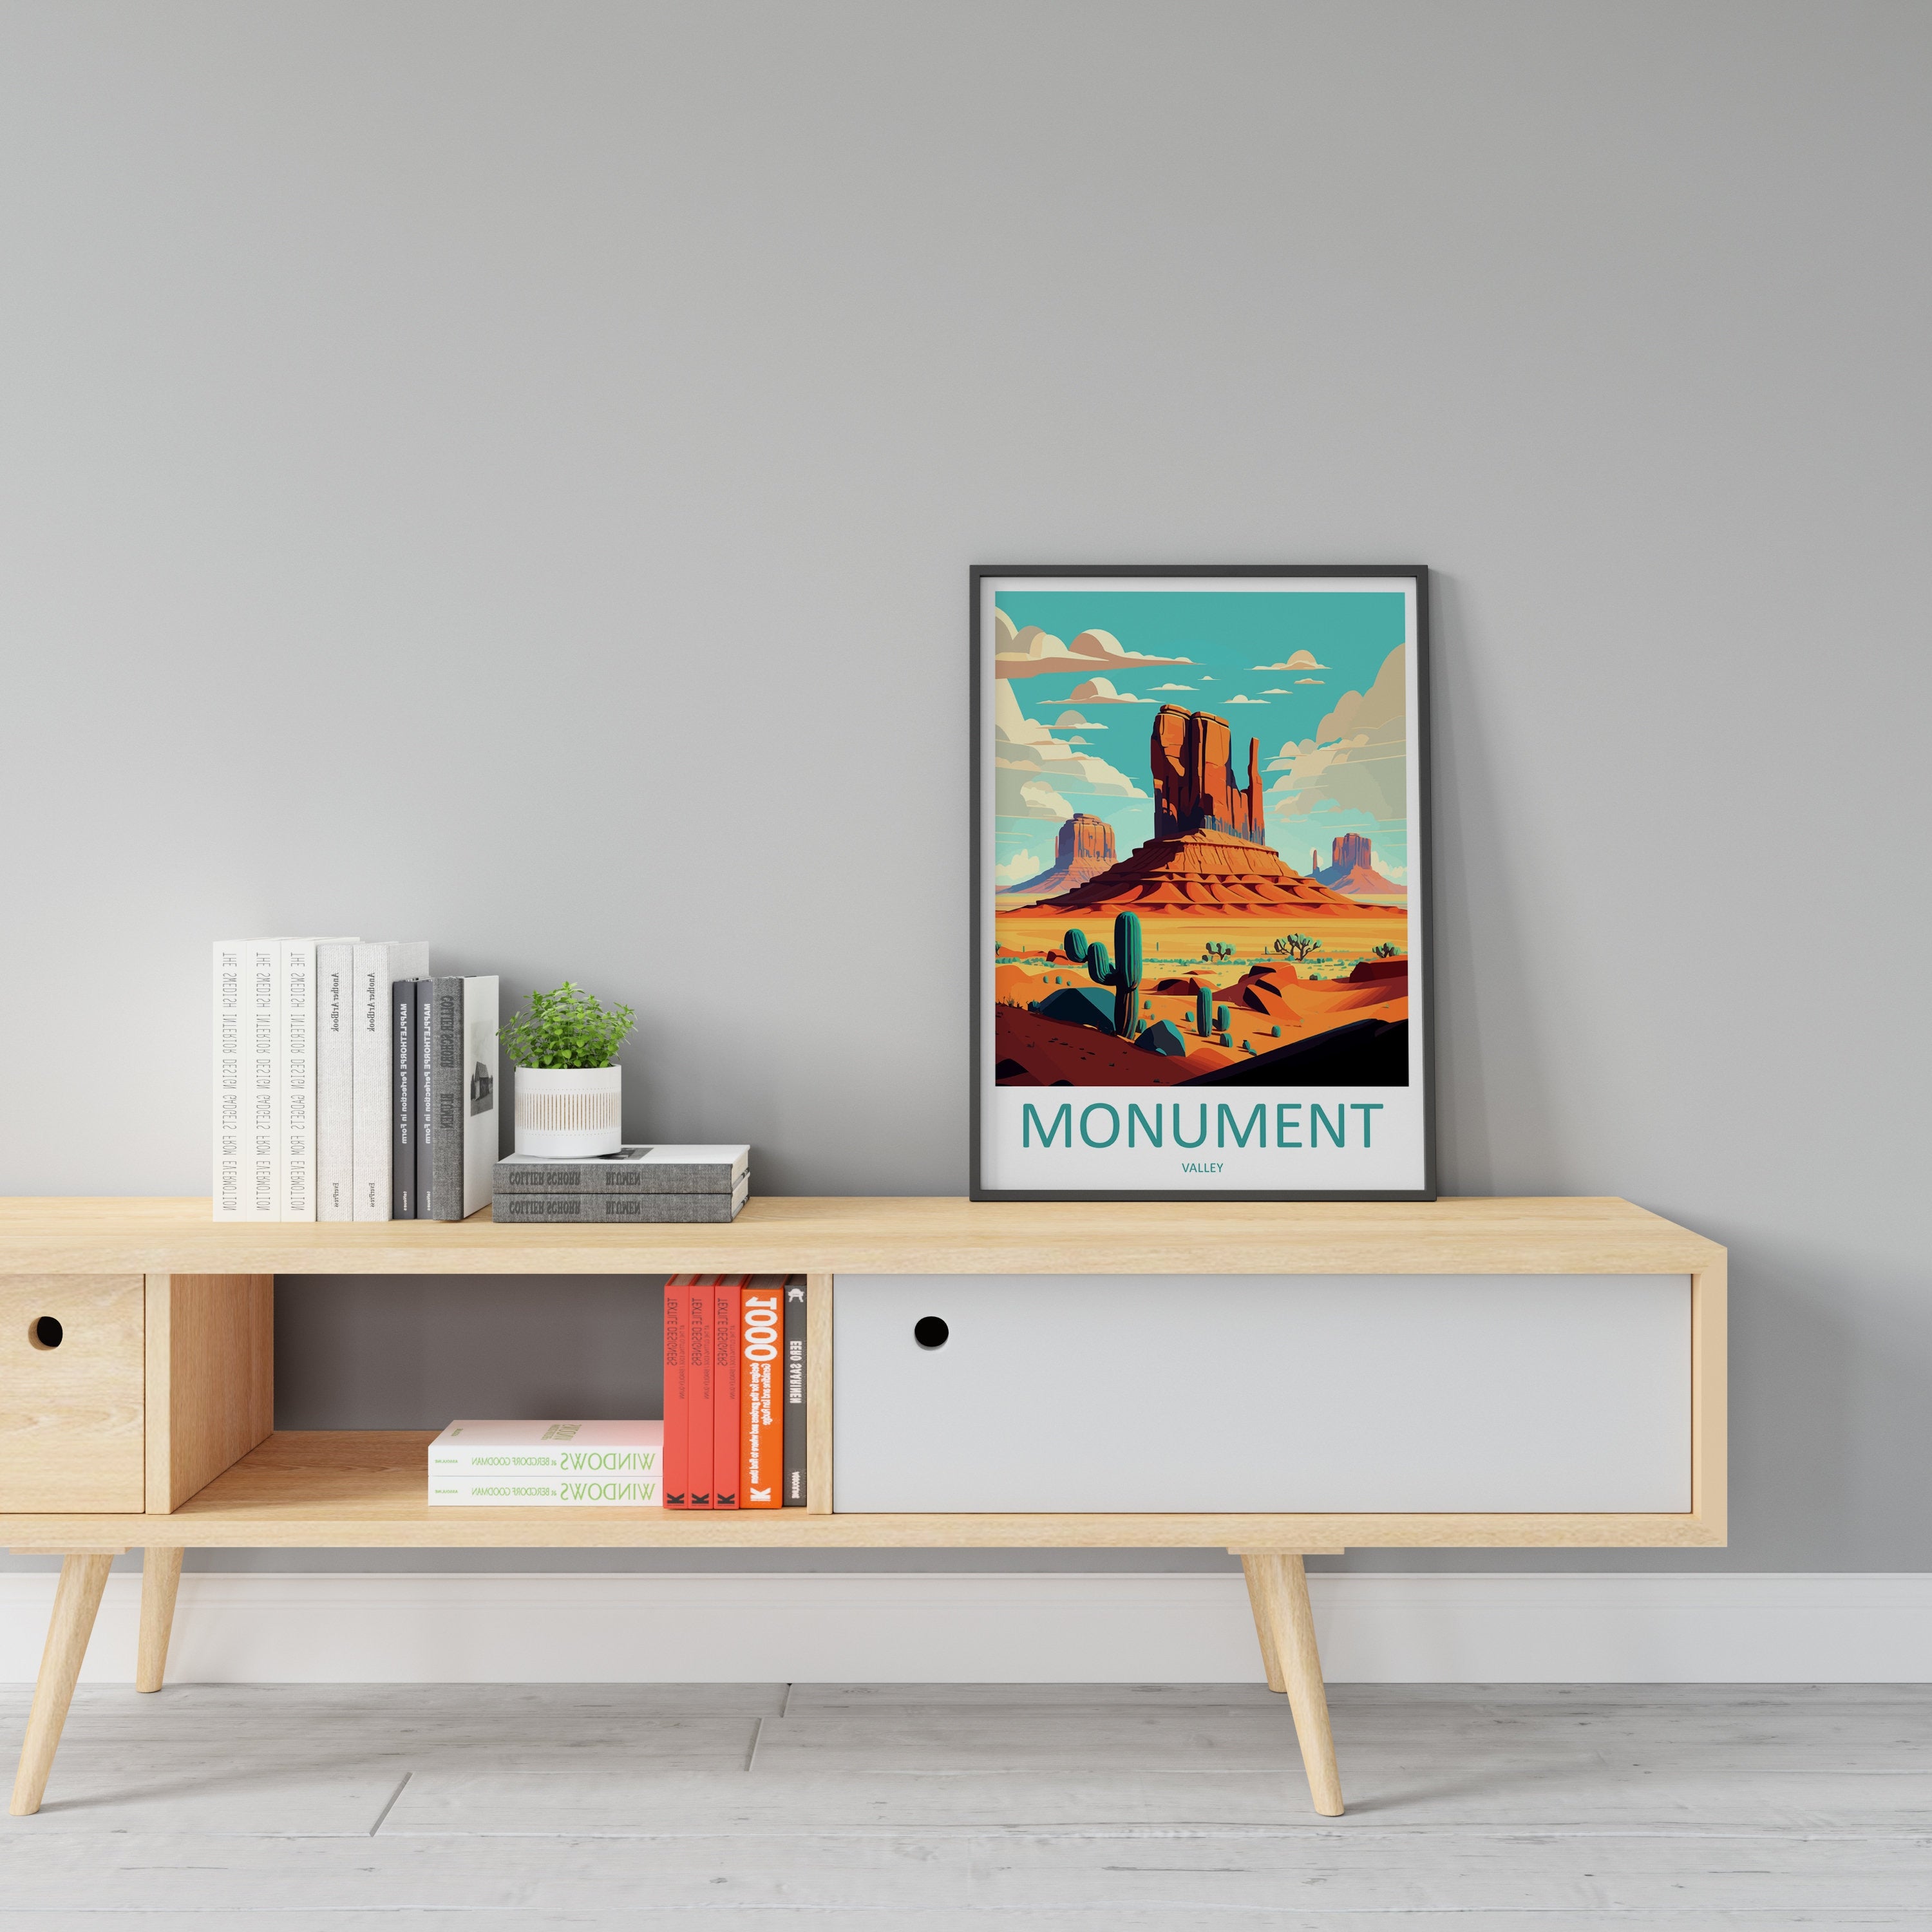 Monument Valley Travel Print Wall Art Monument Valley Wall Hanging Home Decor Arizona Art Gift Monument Valley Lovers Arizona Desert Art